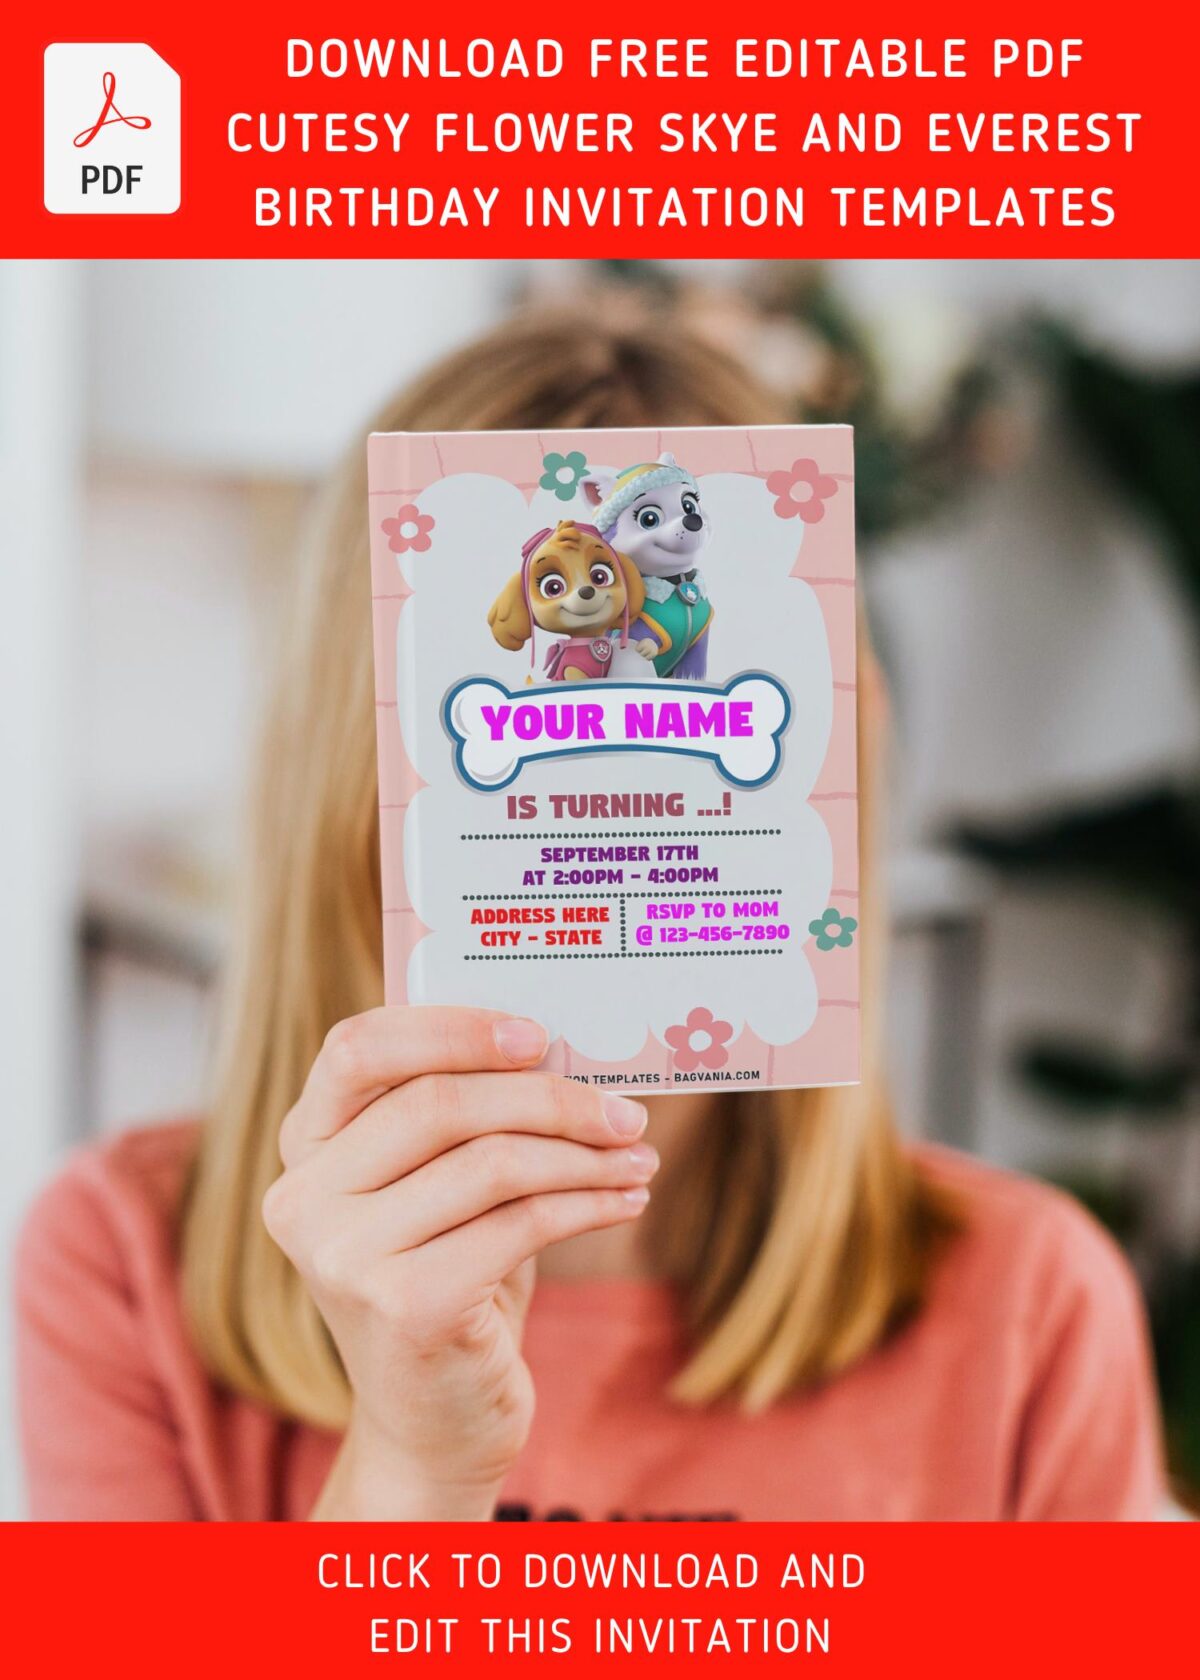 (Free Editable PDF) Quirky Cute Skye And Everest PAW Patrol Birthday Invitation Templates with 